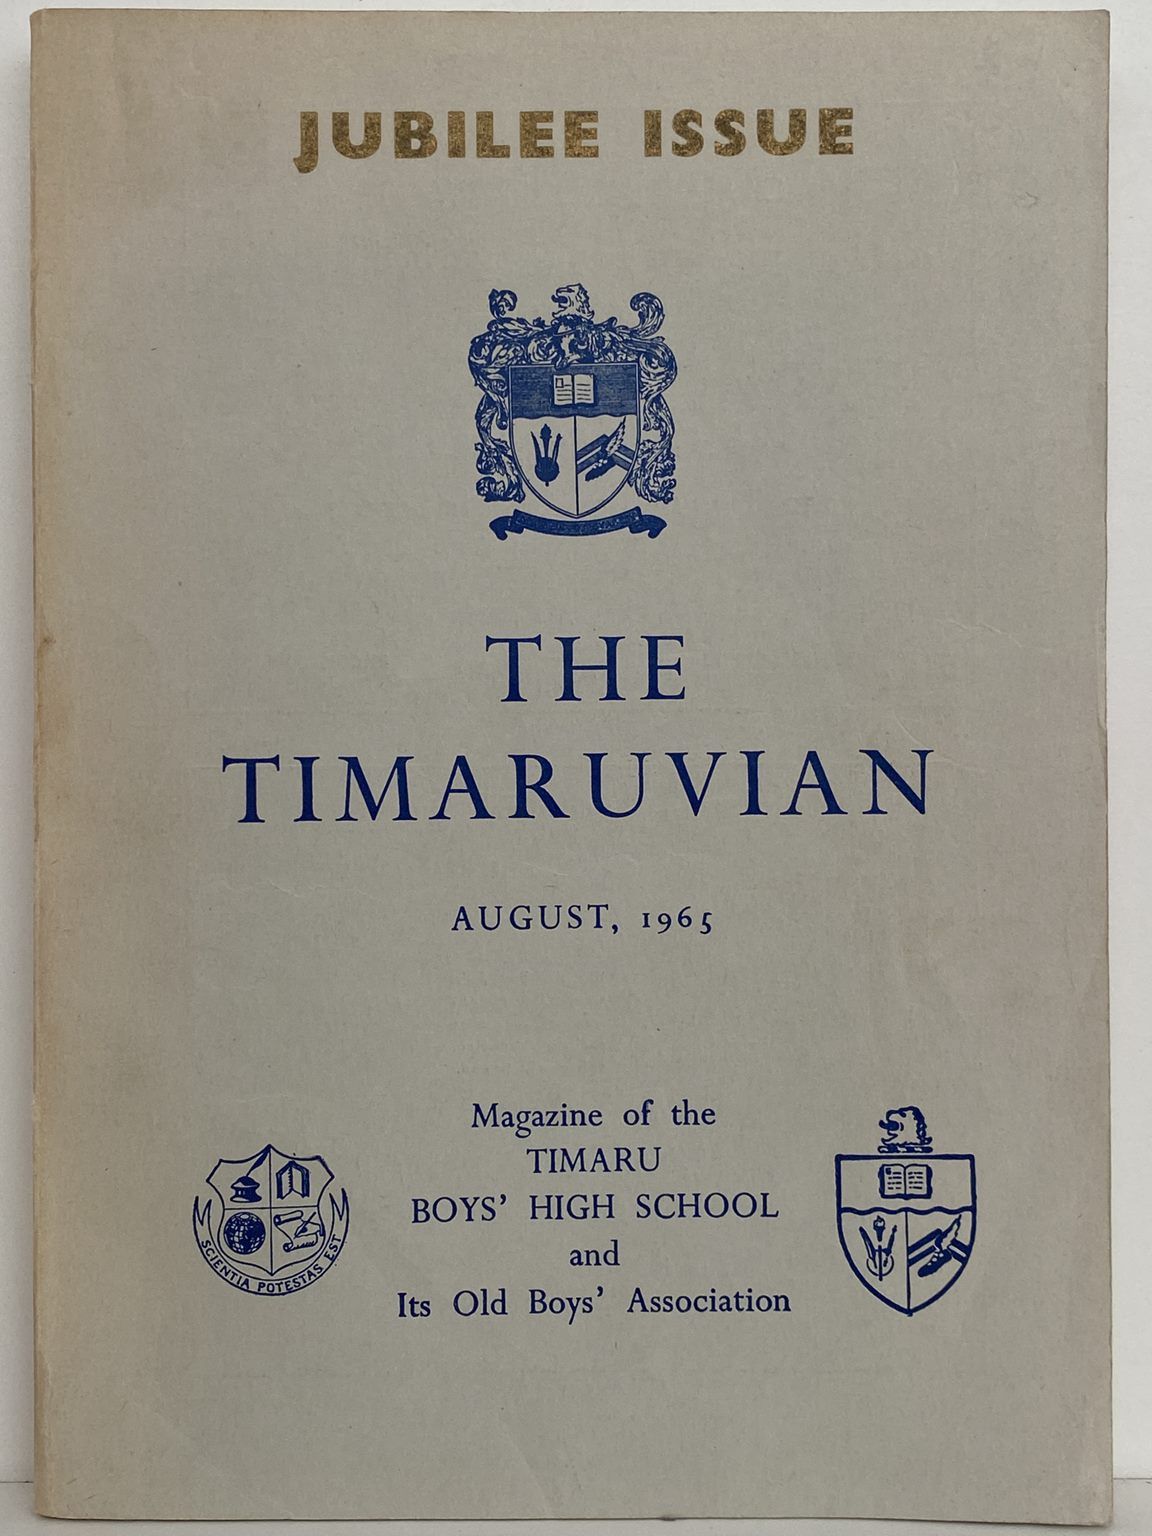 THE TIMARUVIAN: Magazine of the Timaru Boys' High School and its Old Boys' Association 1965